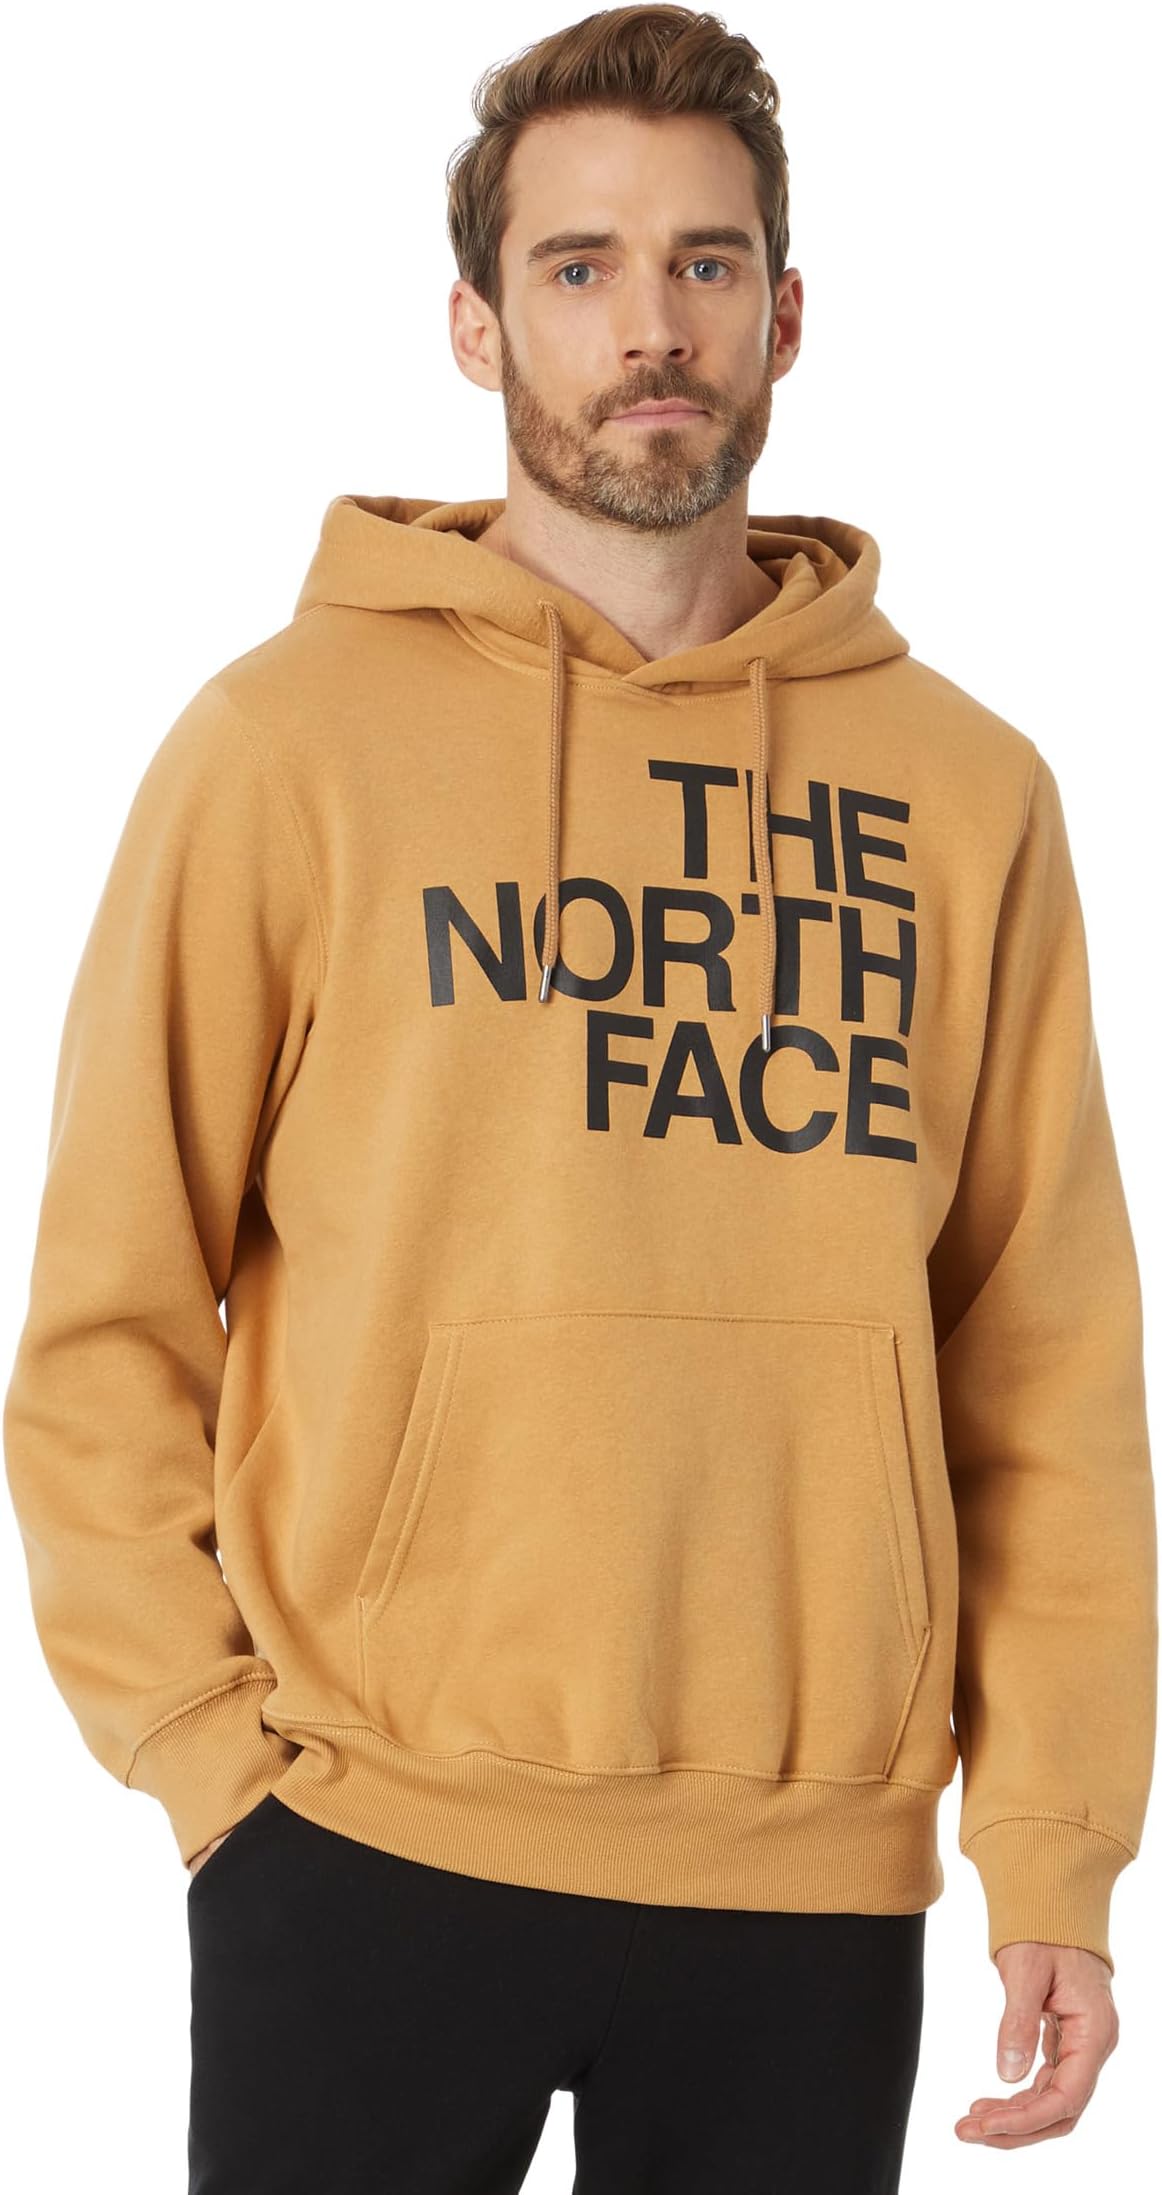 Толстовка с брендом Proud The North Face, цвет Almond Butter/TNF Black куртка the north face freedom insulated plus цвет tnf black almond butter